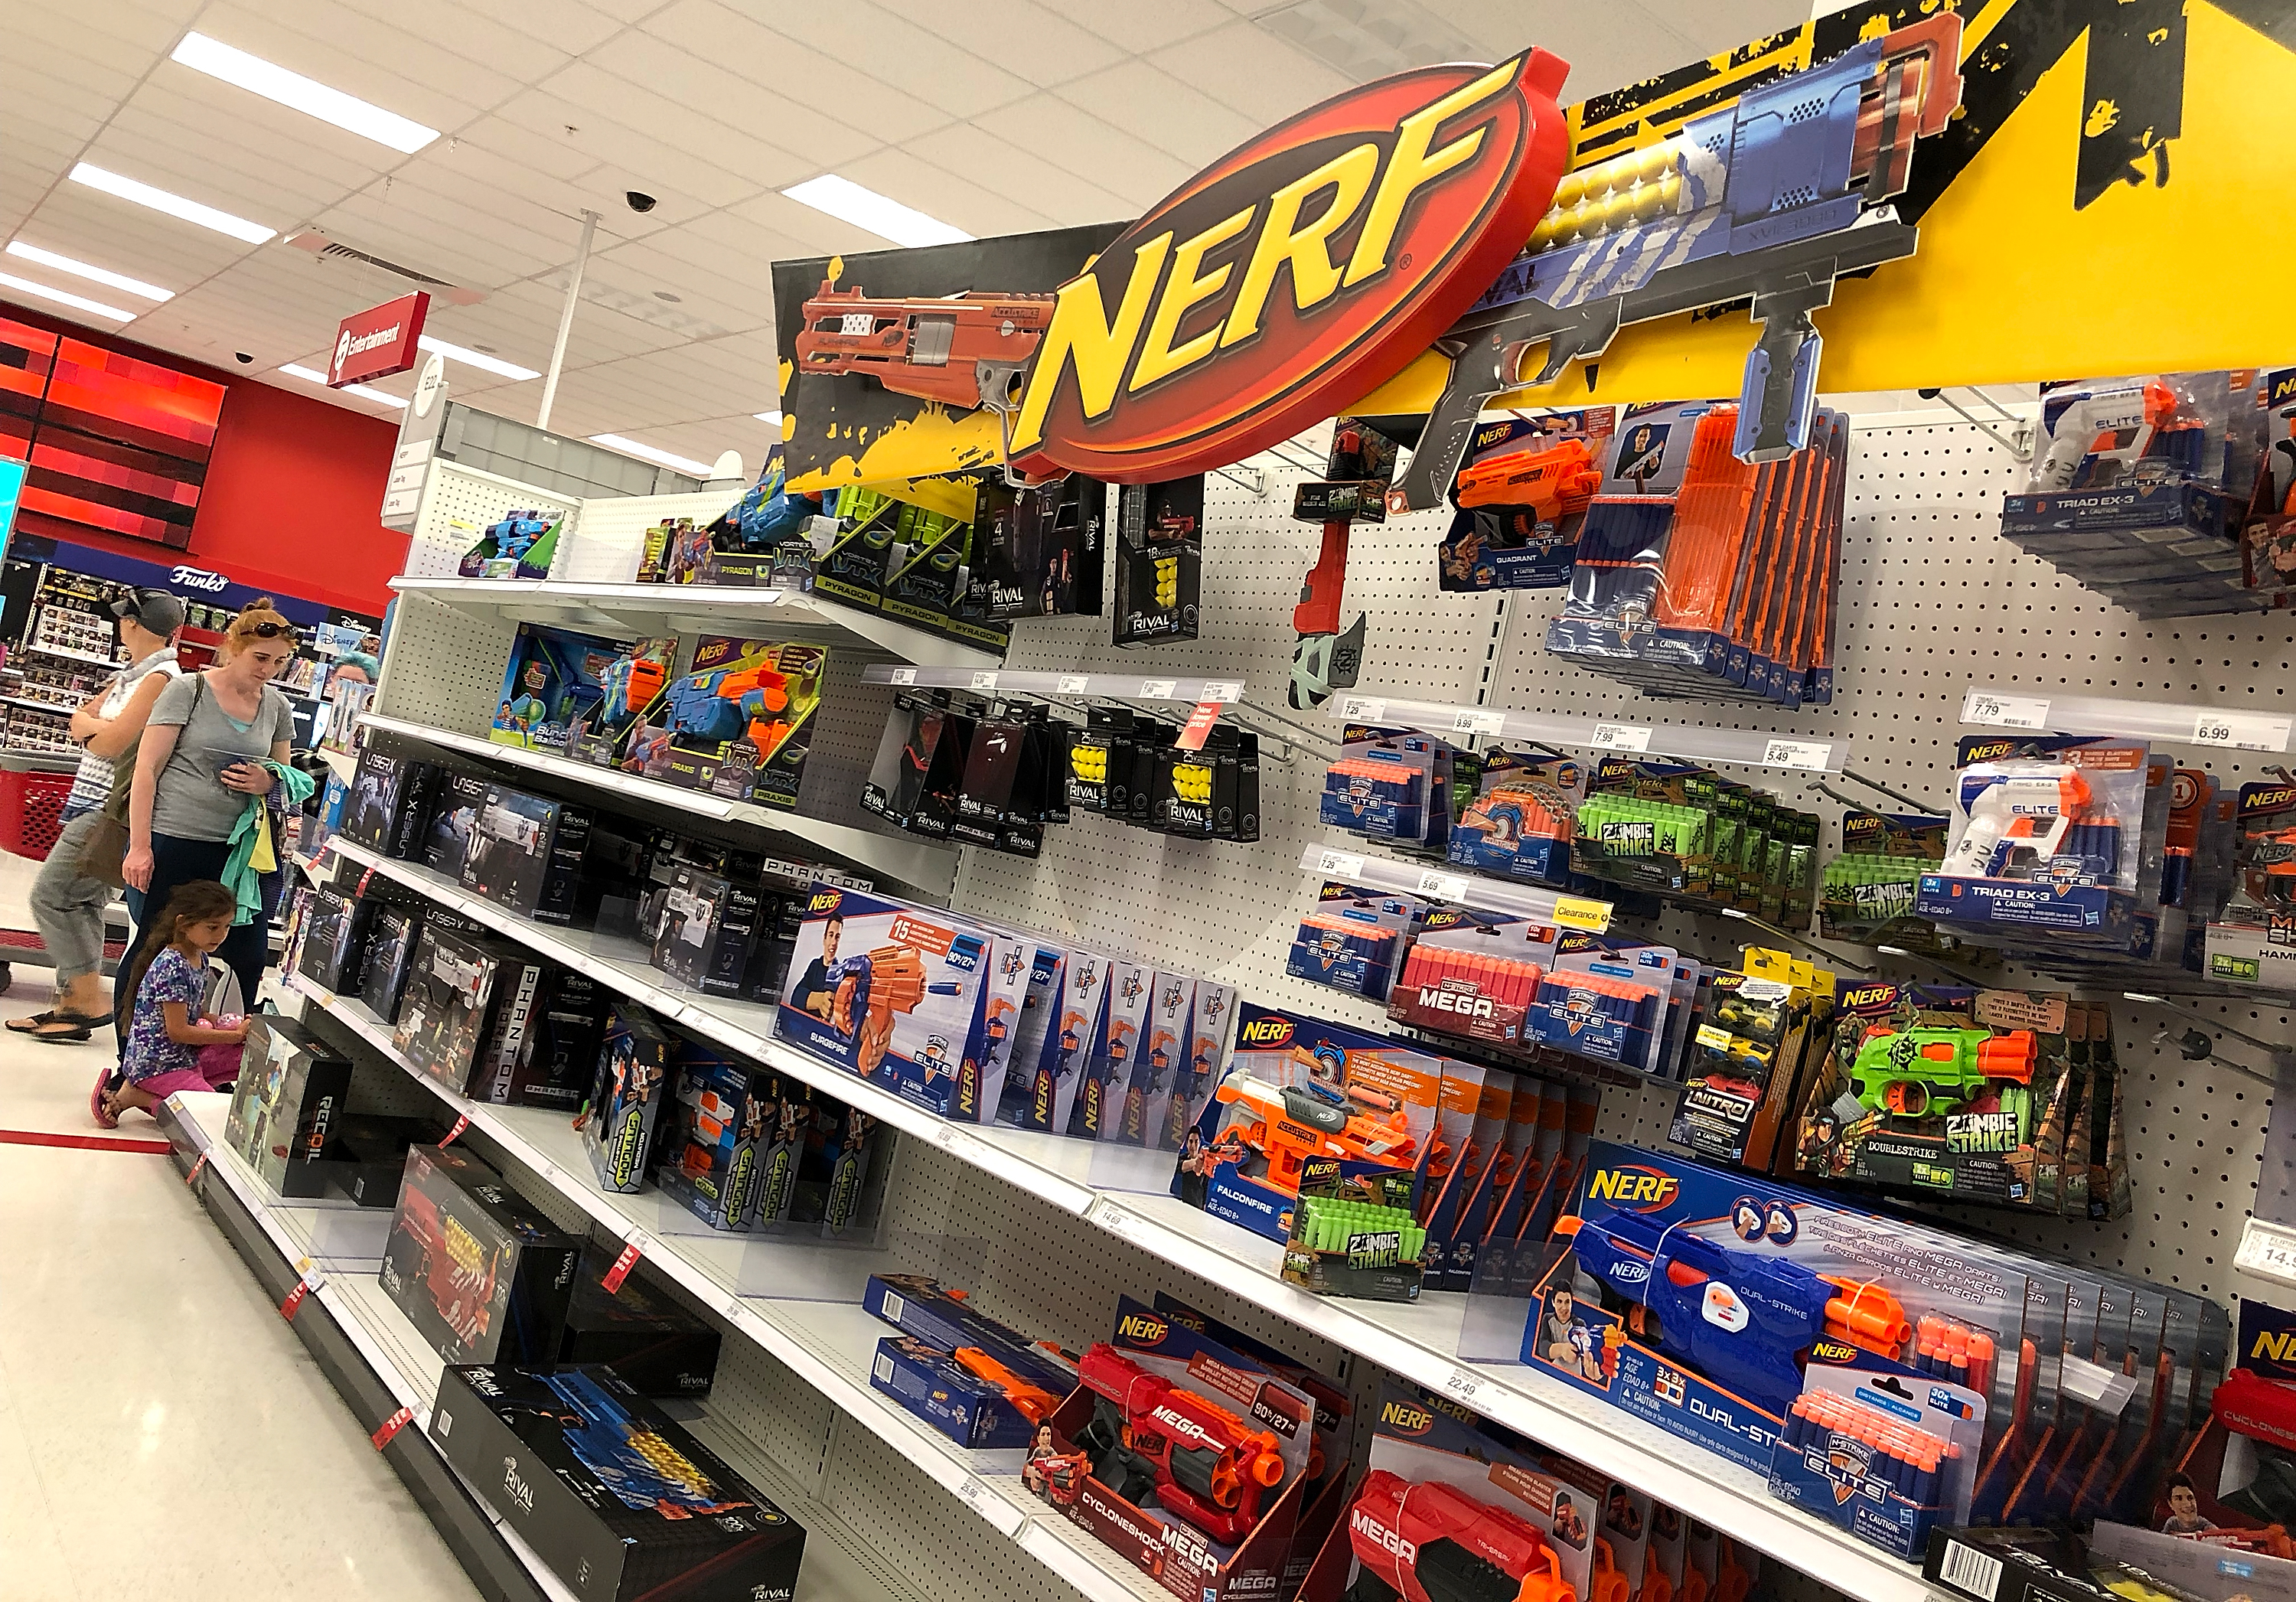 SAN RAFAEL, CA - JULY 23: Nerf toys are displayed at a Target store on July 23, 2018 in San Rafael, California. Hasbro Inc. reported better than expected second-quarter revenue of $904.5 million compared to $972.5 million in the previous year. Despite the loss, revenues were well above analyst expectations sending stocks higher. (Photo by Justin Sullivan/Getty Images)